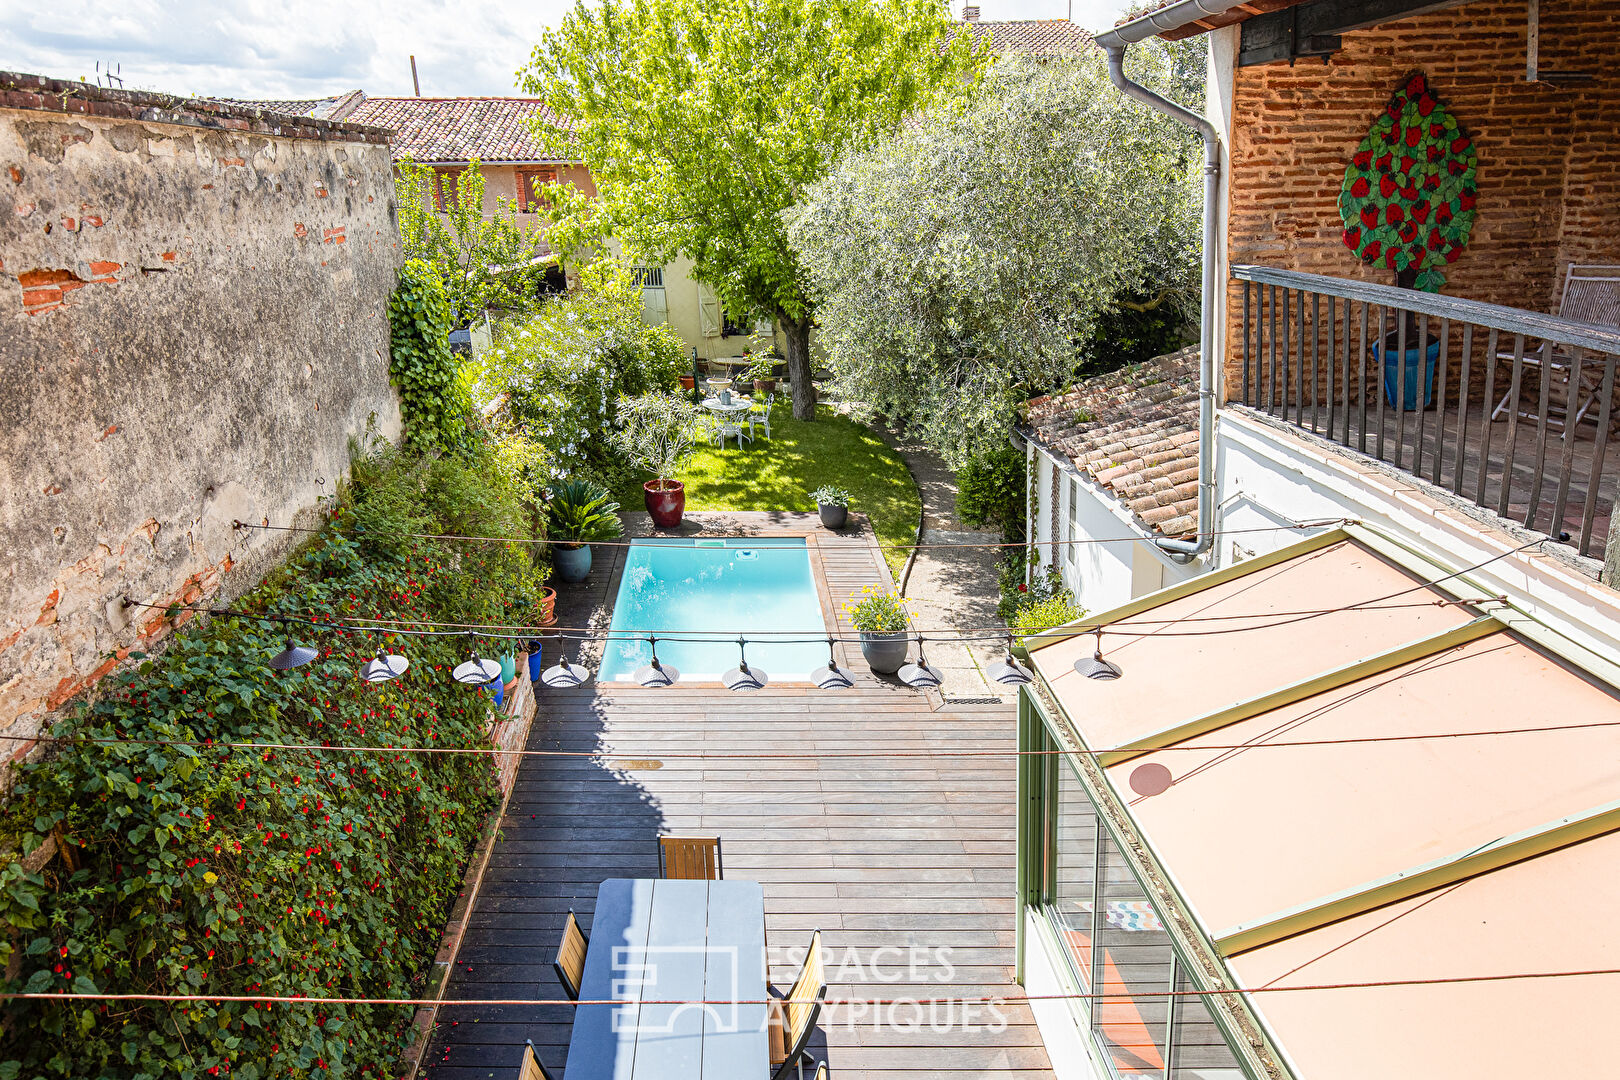 House of character in the heart of the market halls of Granada and its intimate garden